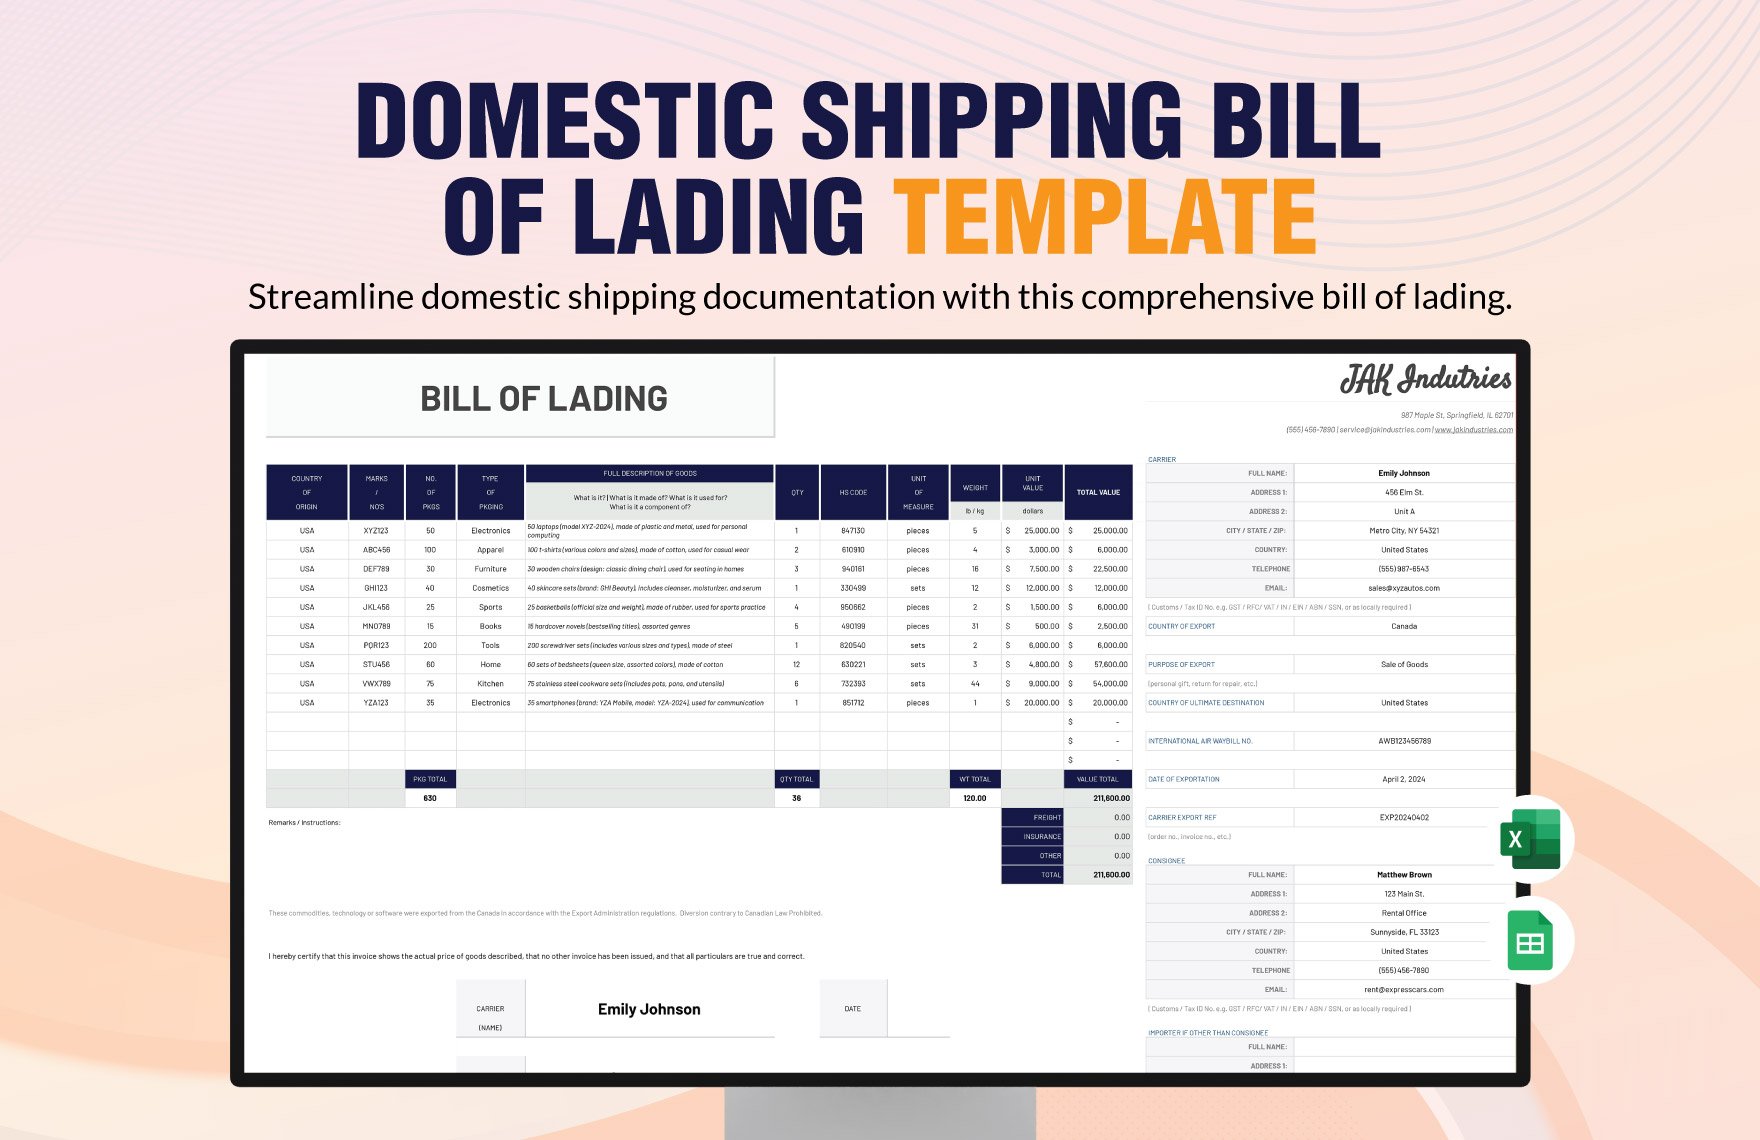 Domestic Shipping Bill of Lading Template in Excel, Google Sheets